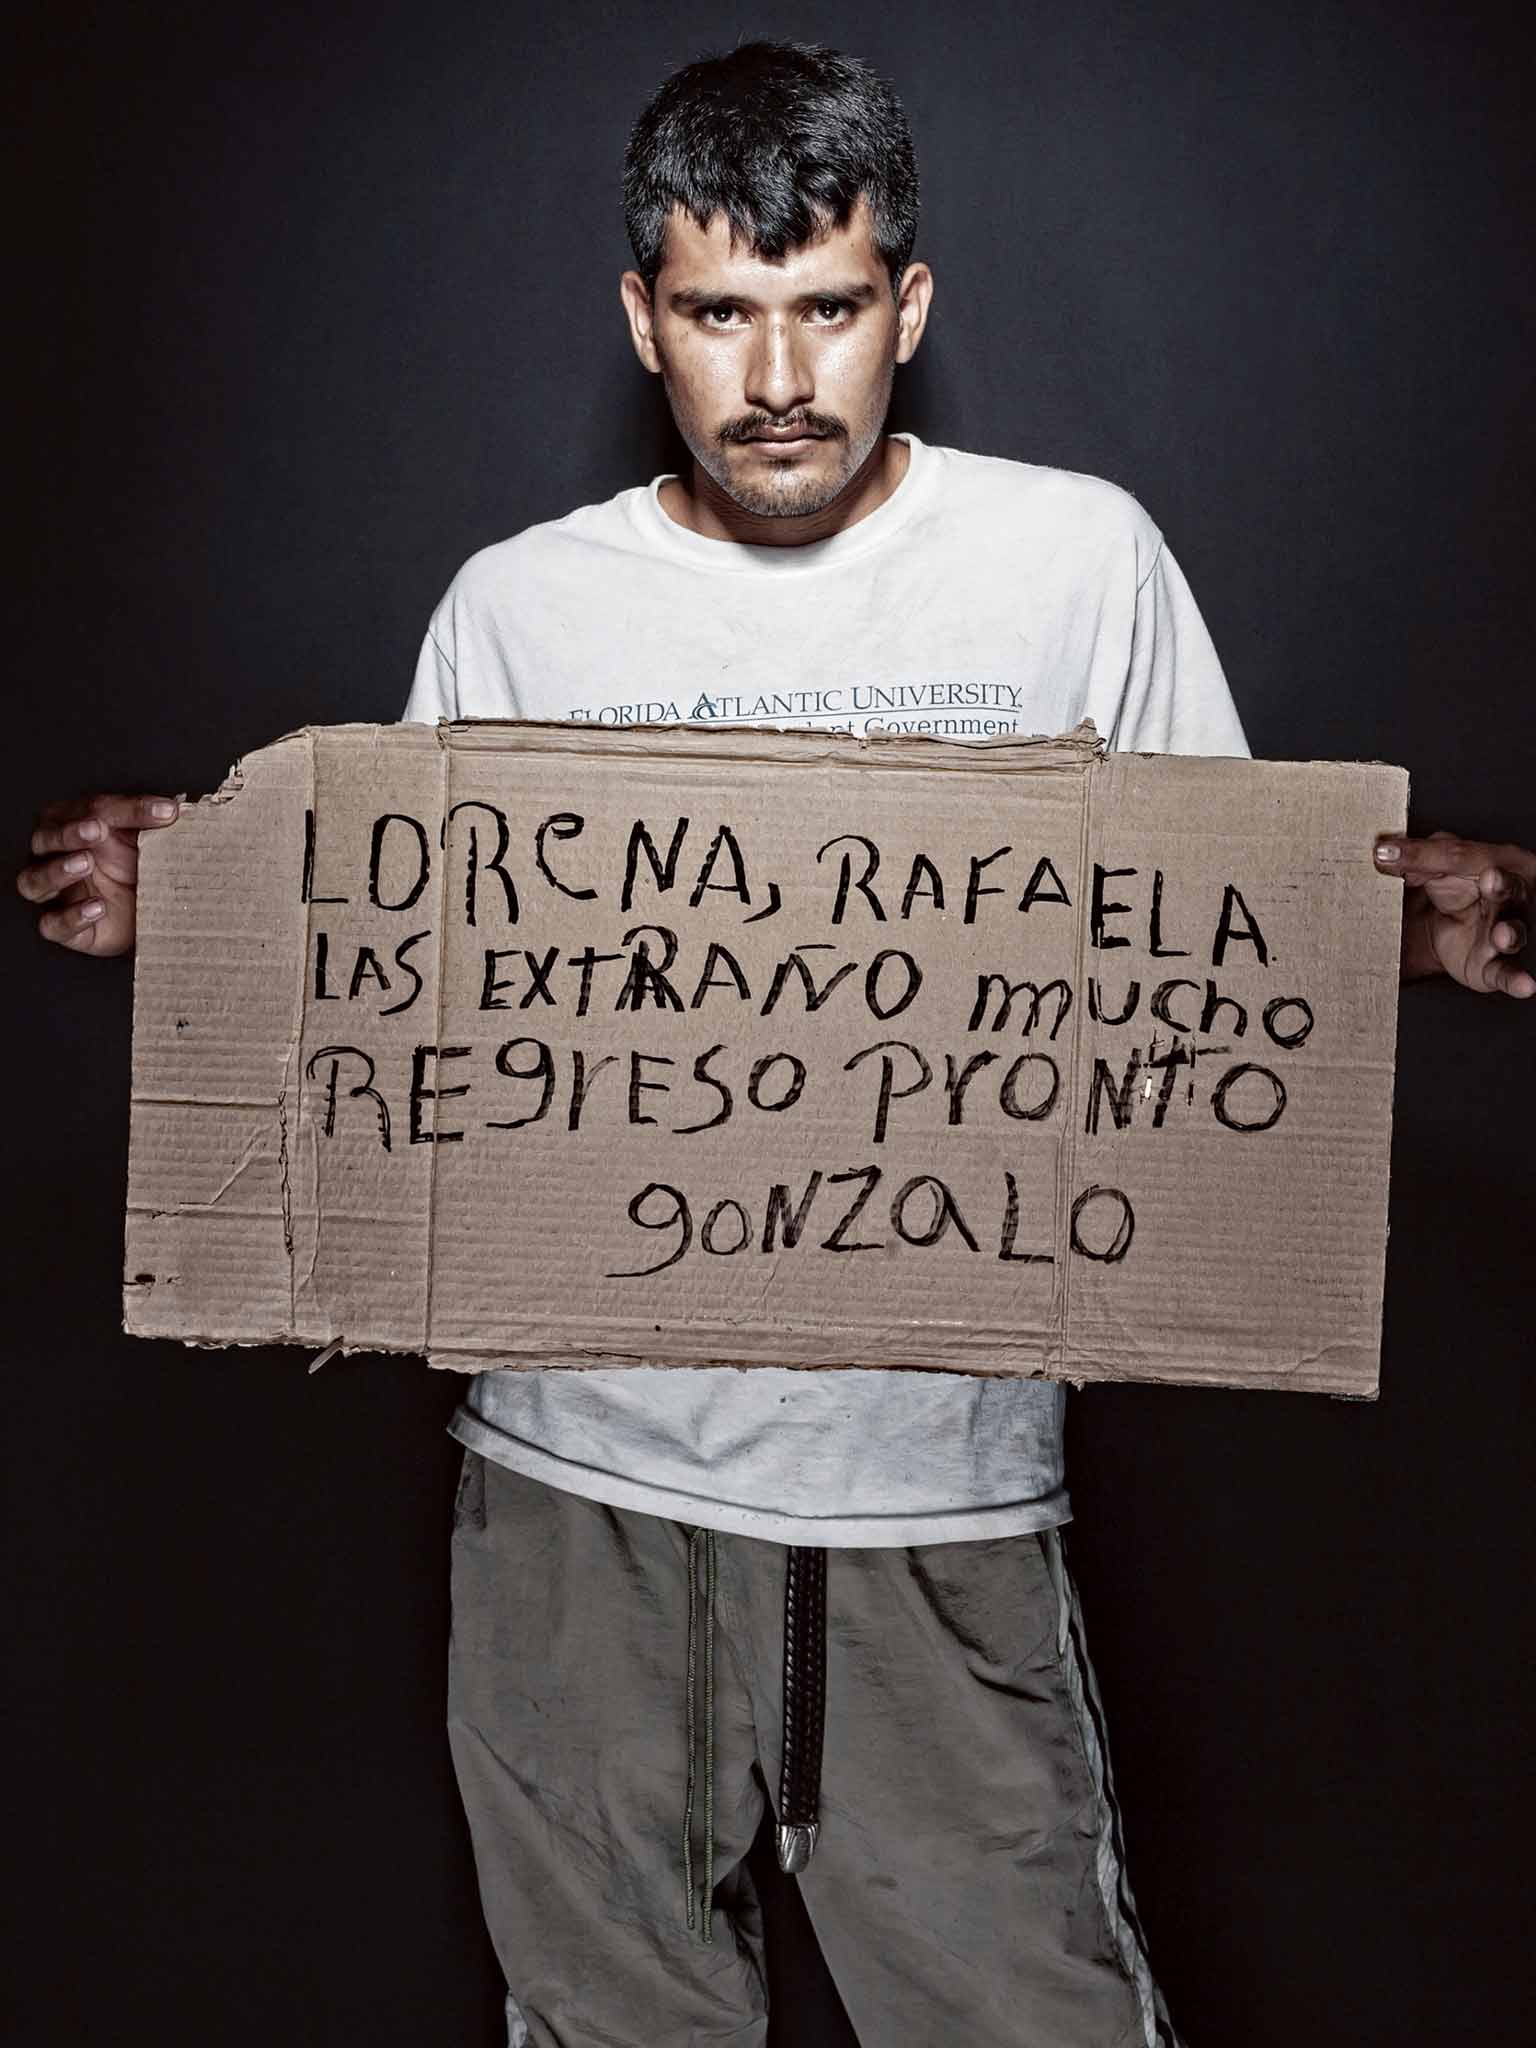 Gonzalo: As an undocumented Honduran in Mexico, the 22-year-old still hoped to make it to the US, and held up this message for his wife and nine-month-old daughter in Honduras: 'Lorena, Rafaela, I miss you a lot. Back soon' (Nicola Ókin Frioli/www.nicolao